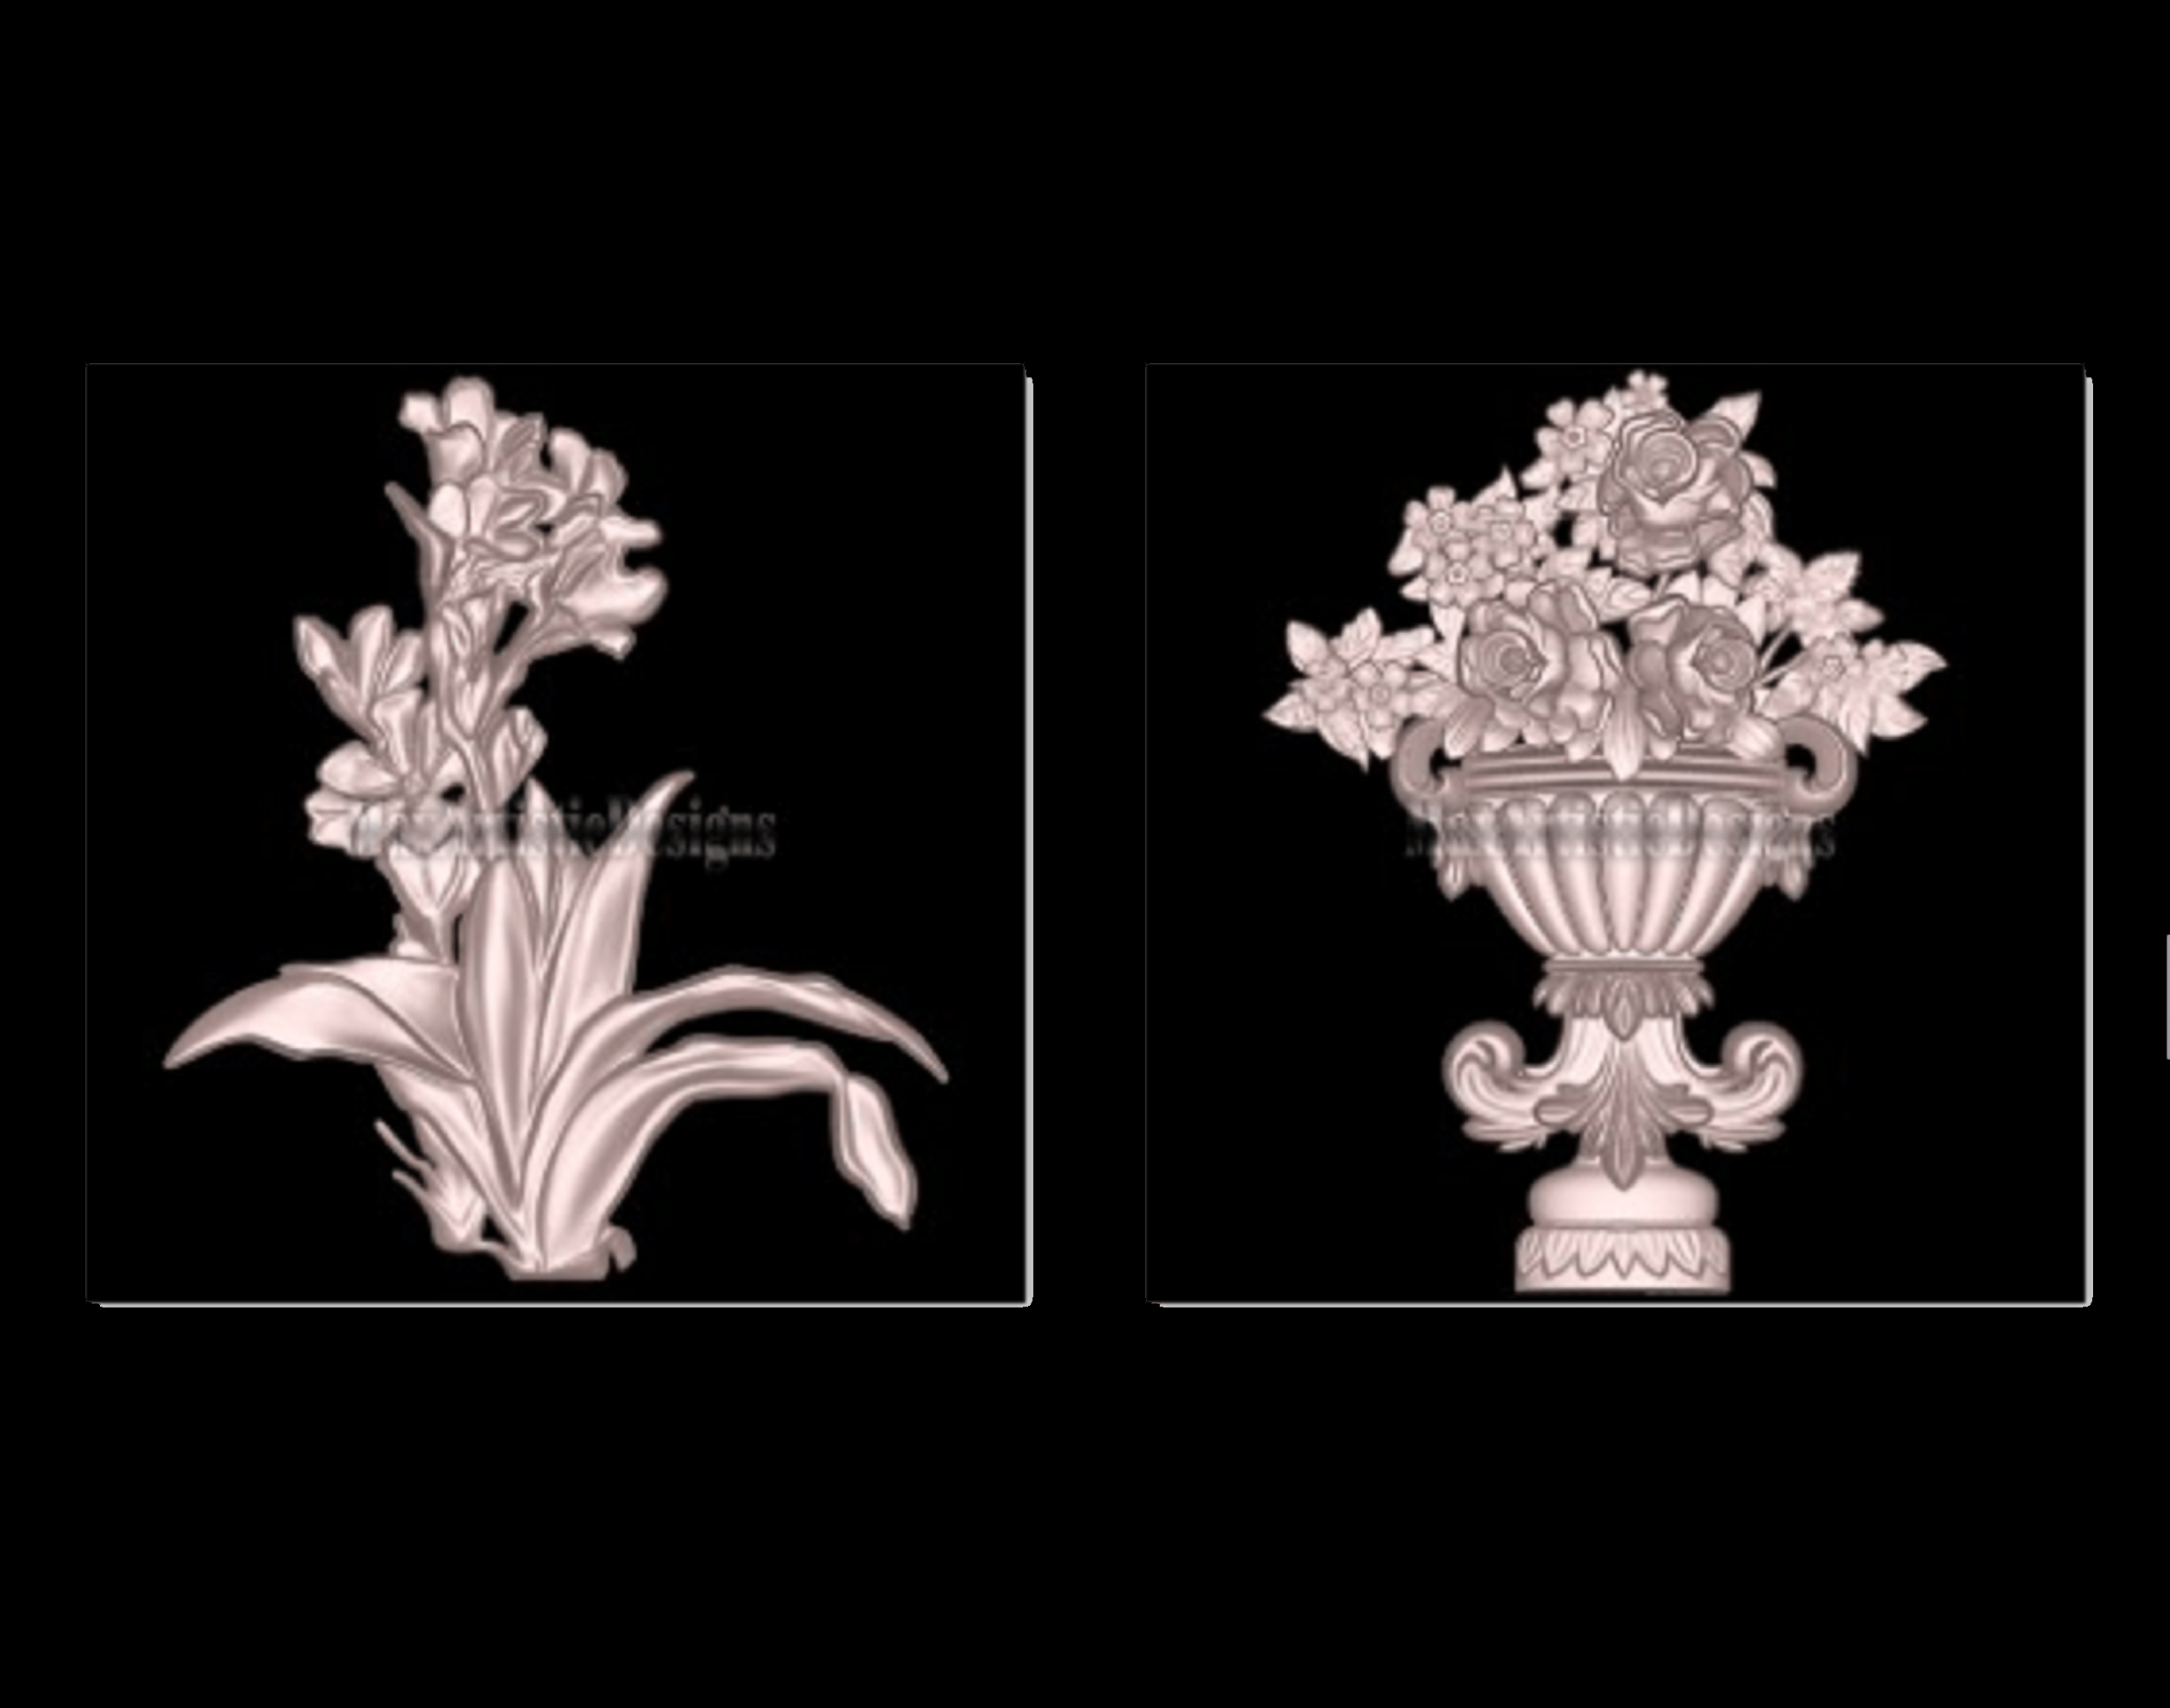 17+ 3d models of roses and flowers for stl relief, cnc router, aspire, 3d printer digital download